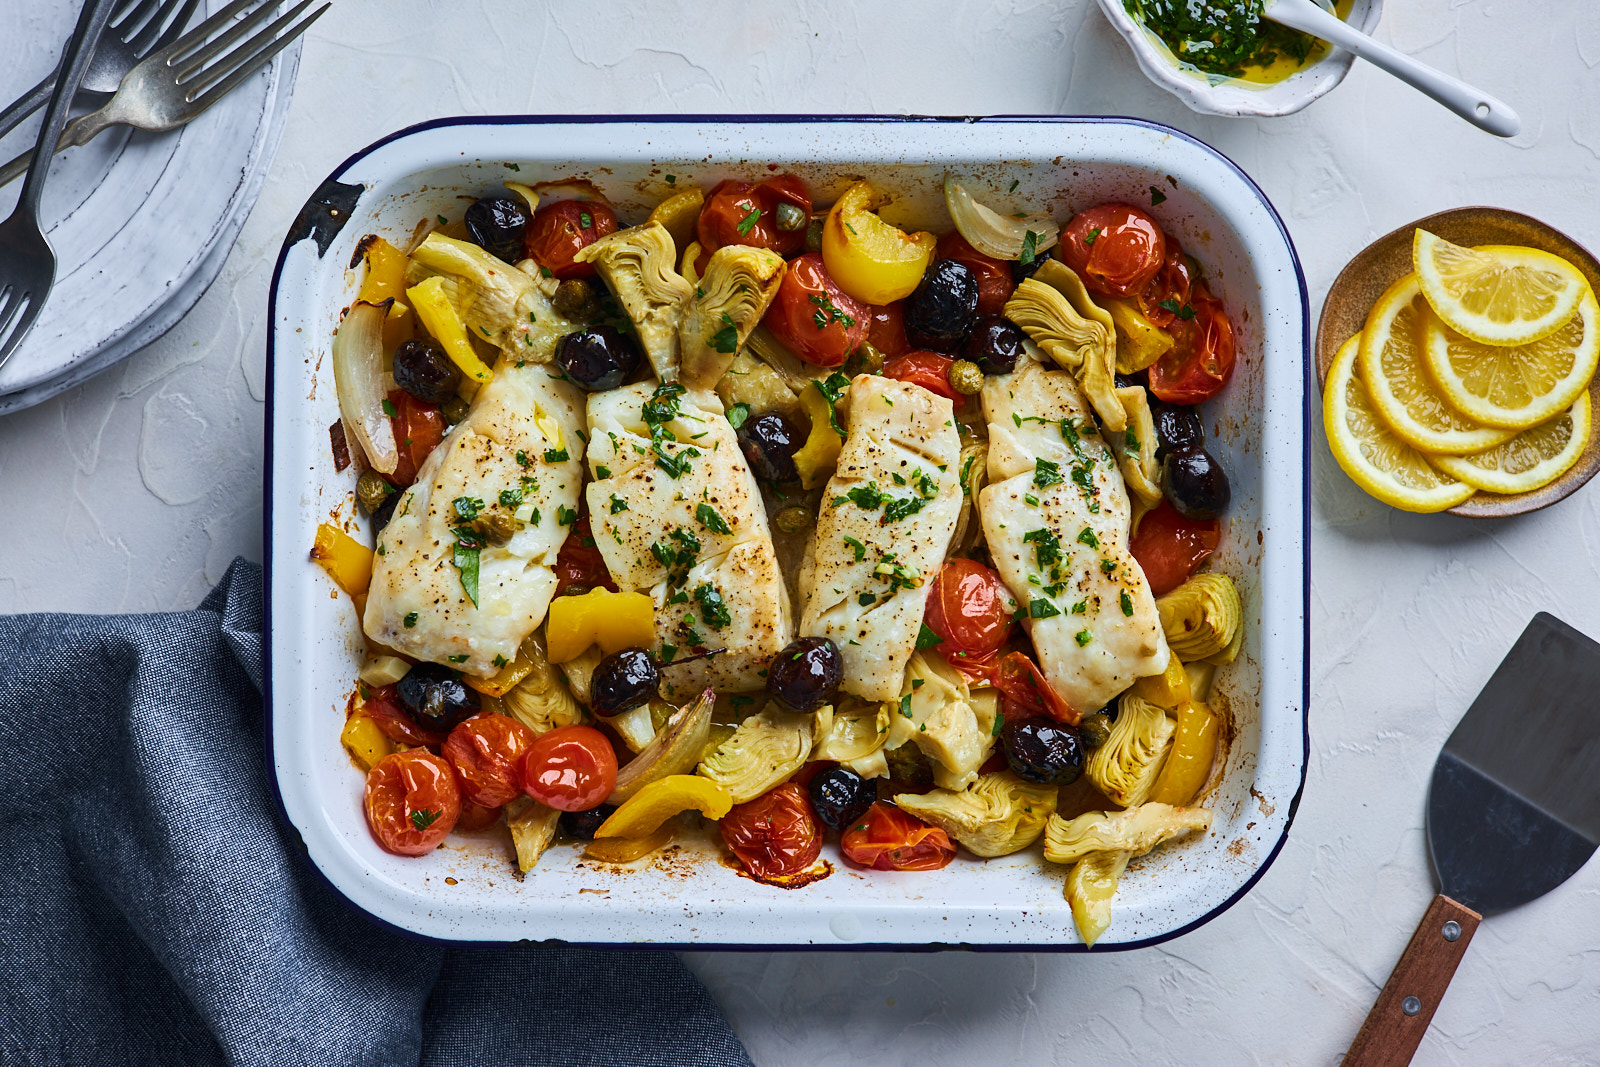 Mediterranean Microwave Fish With Green Beans, Tomatoes, and